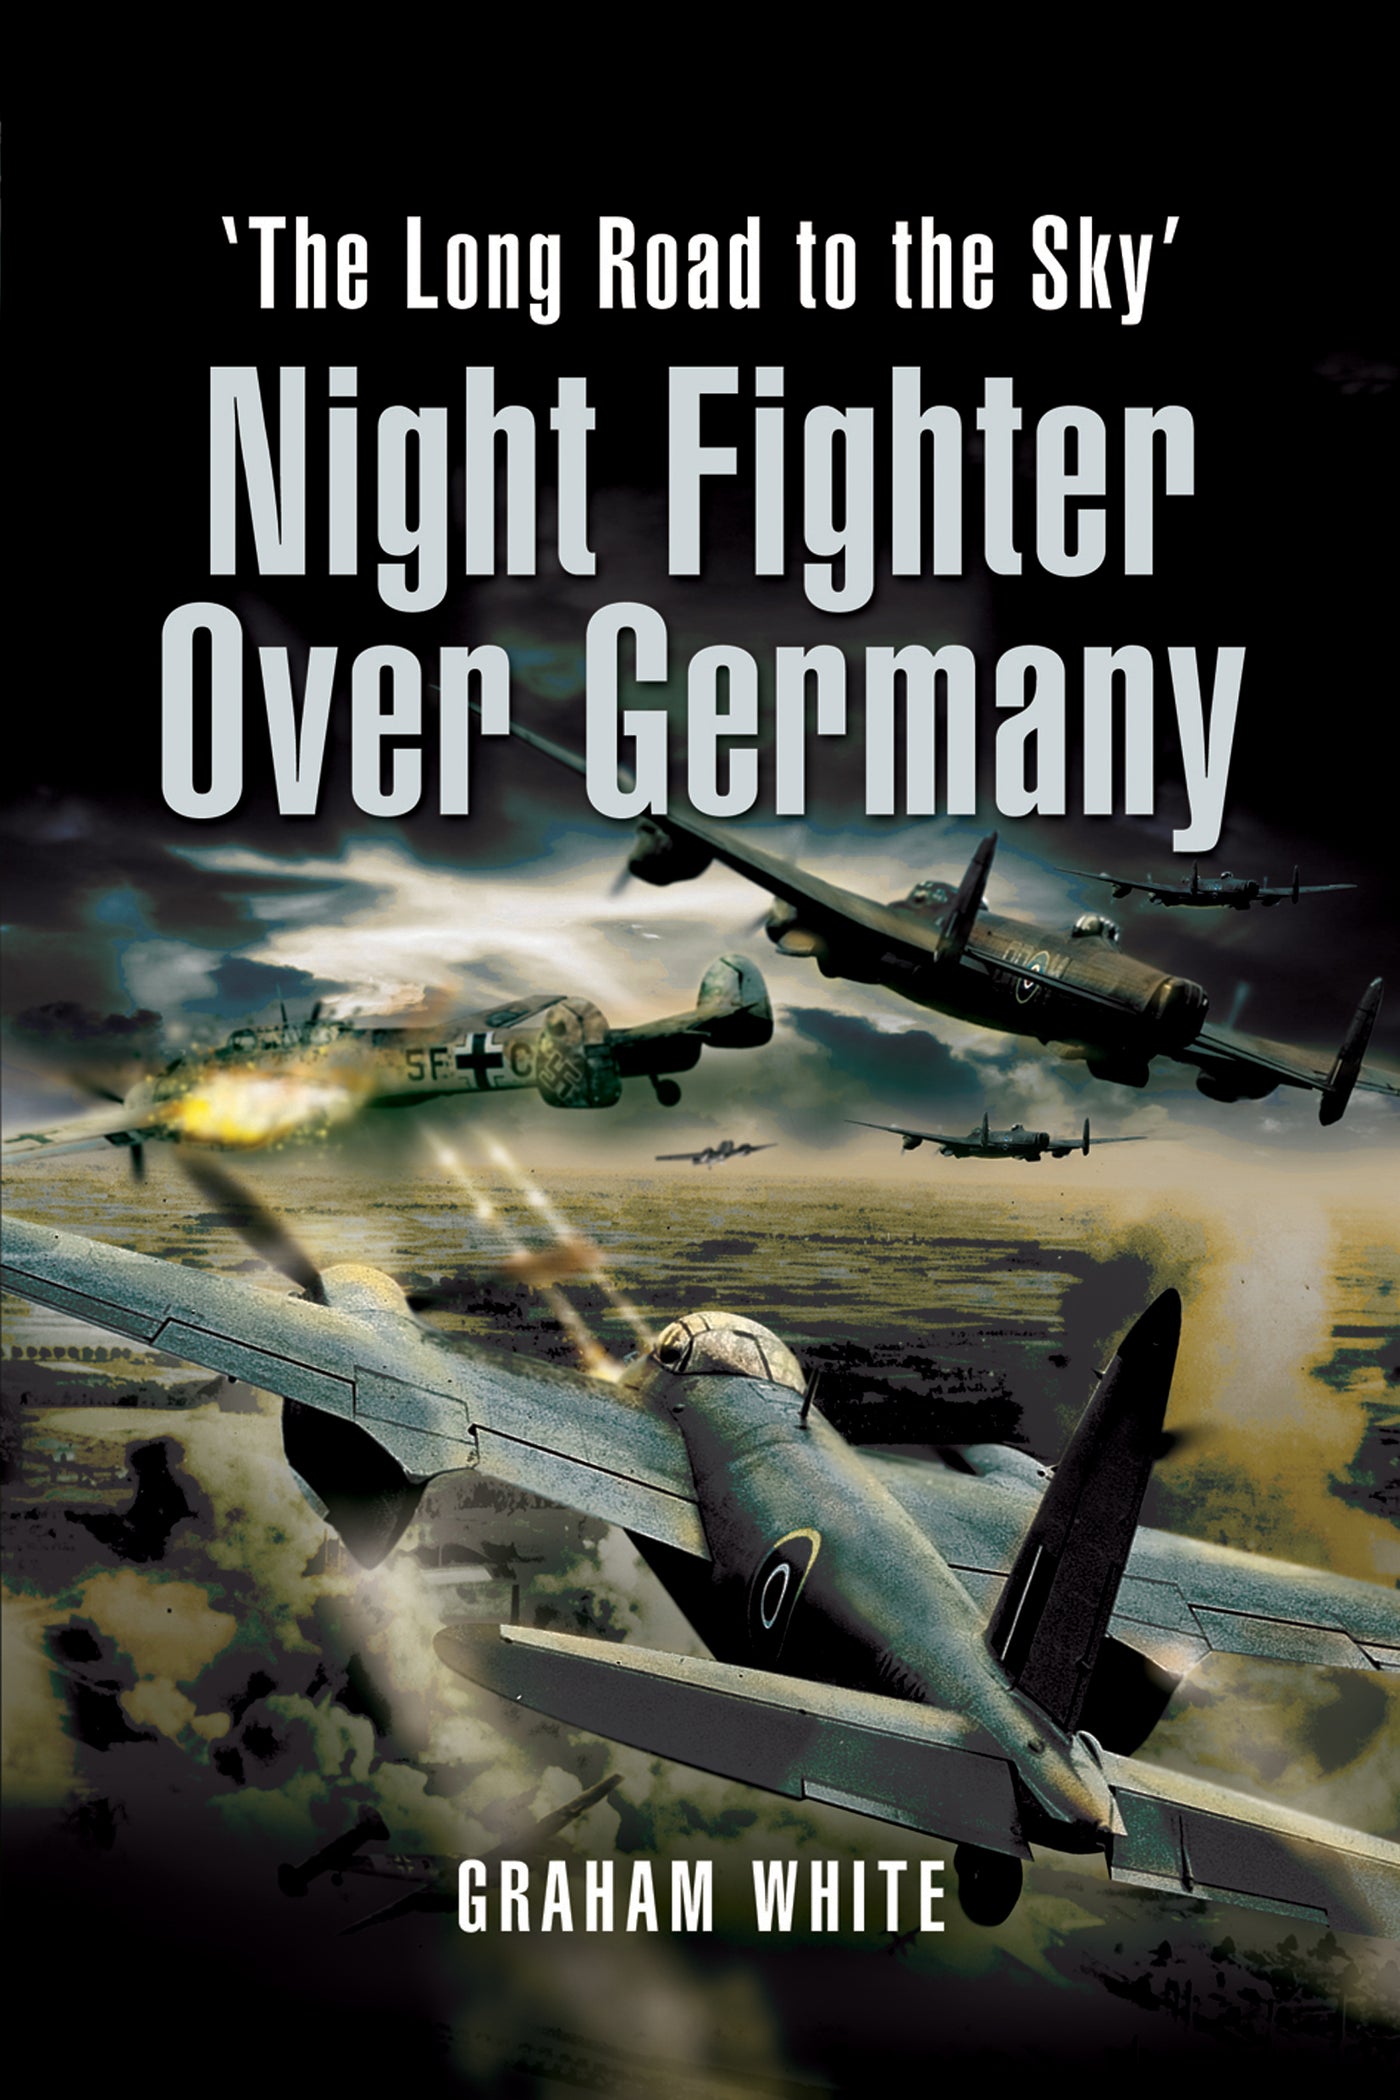 Night Fighter over Germany